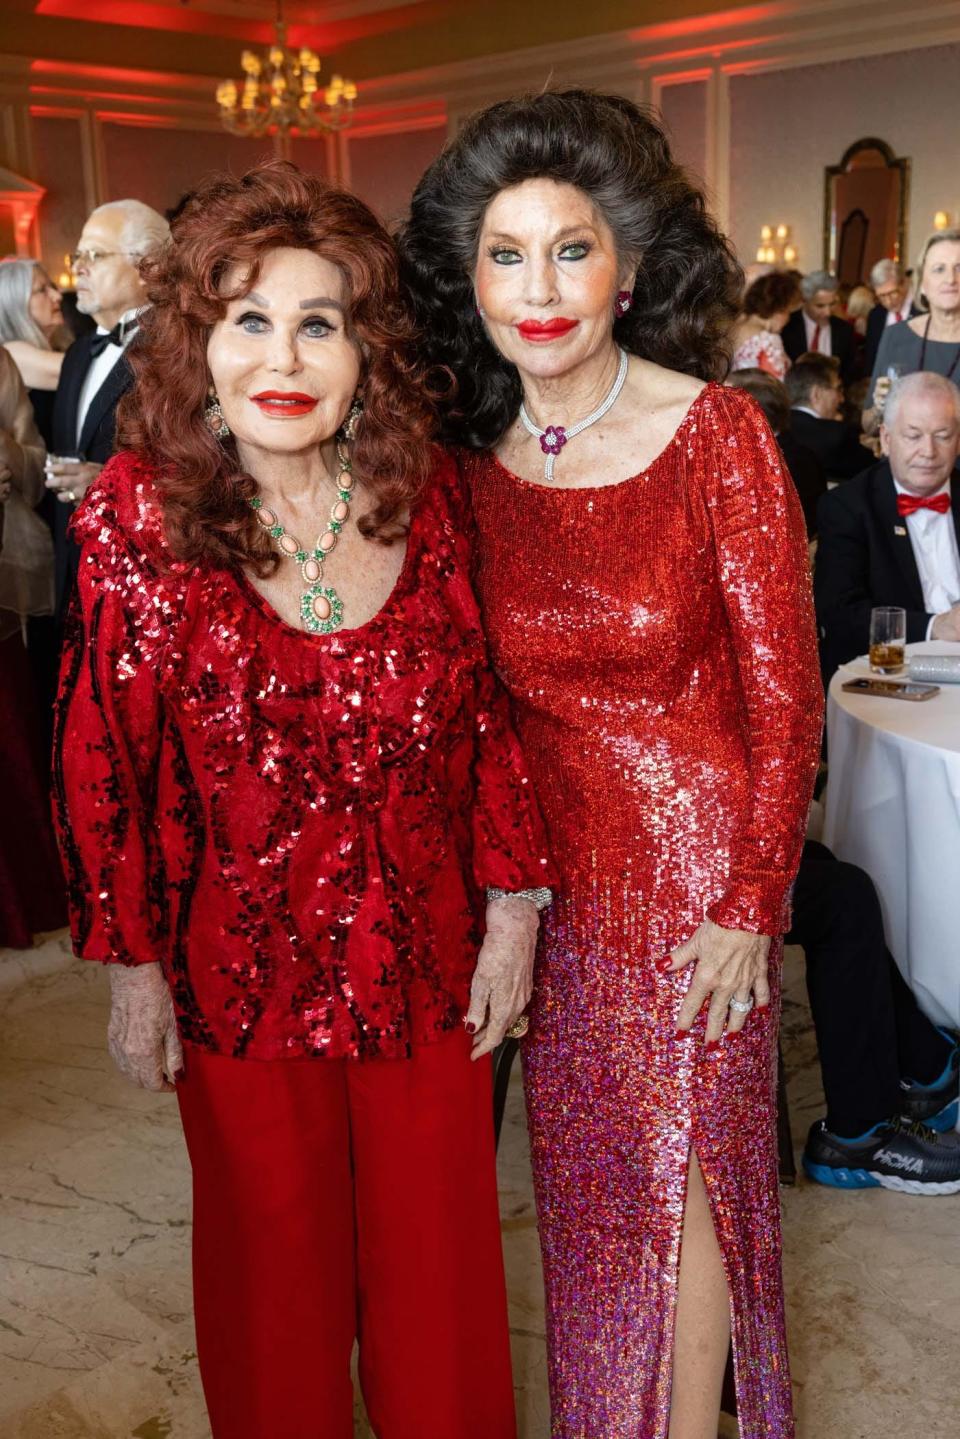 Tova Leidesdorf and Christine Lynn at the Lady in Red Gala in March 2023. The 2025 gala is set for March 2 at The Breakers.